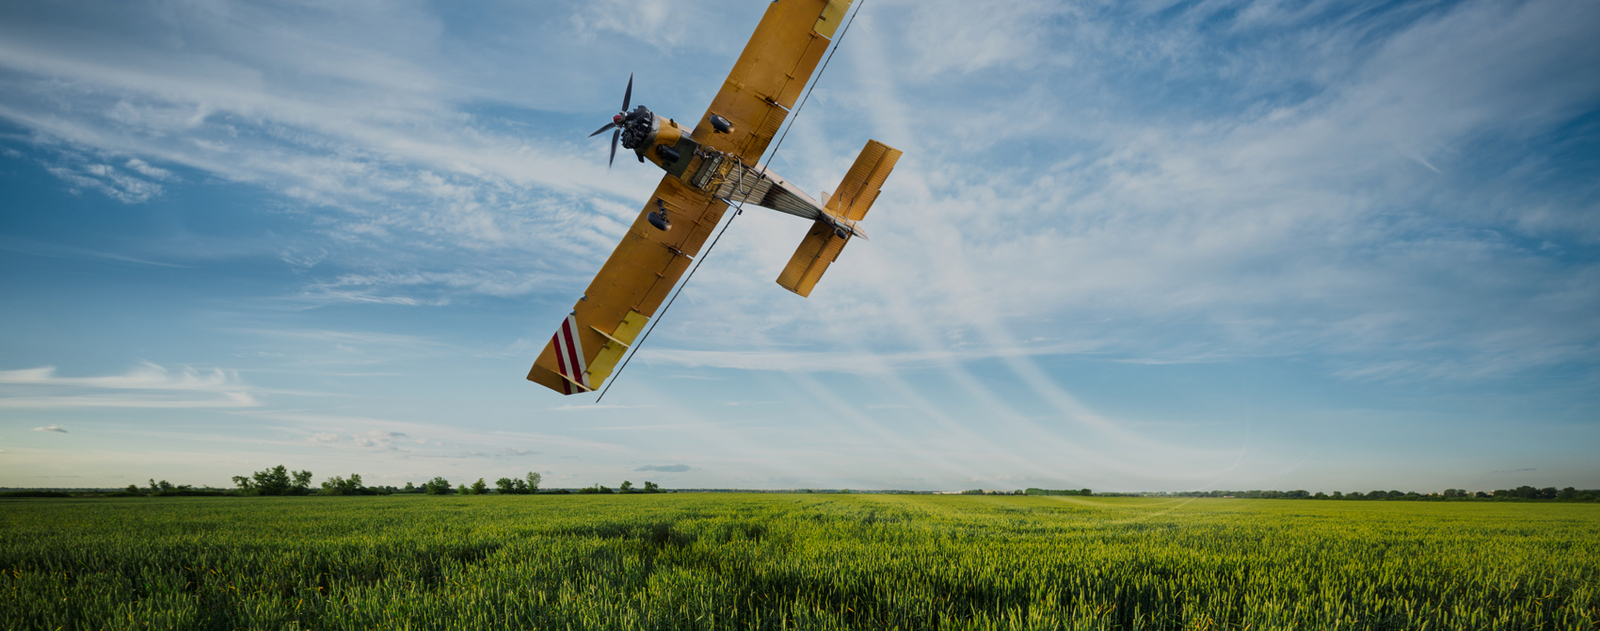 crop-duster-Safety-Training